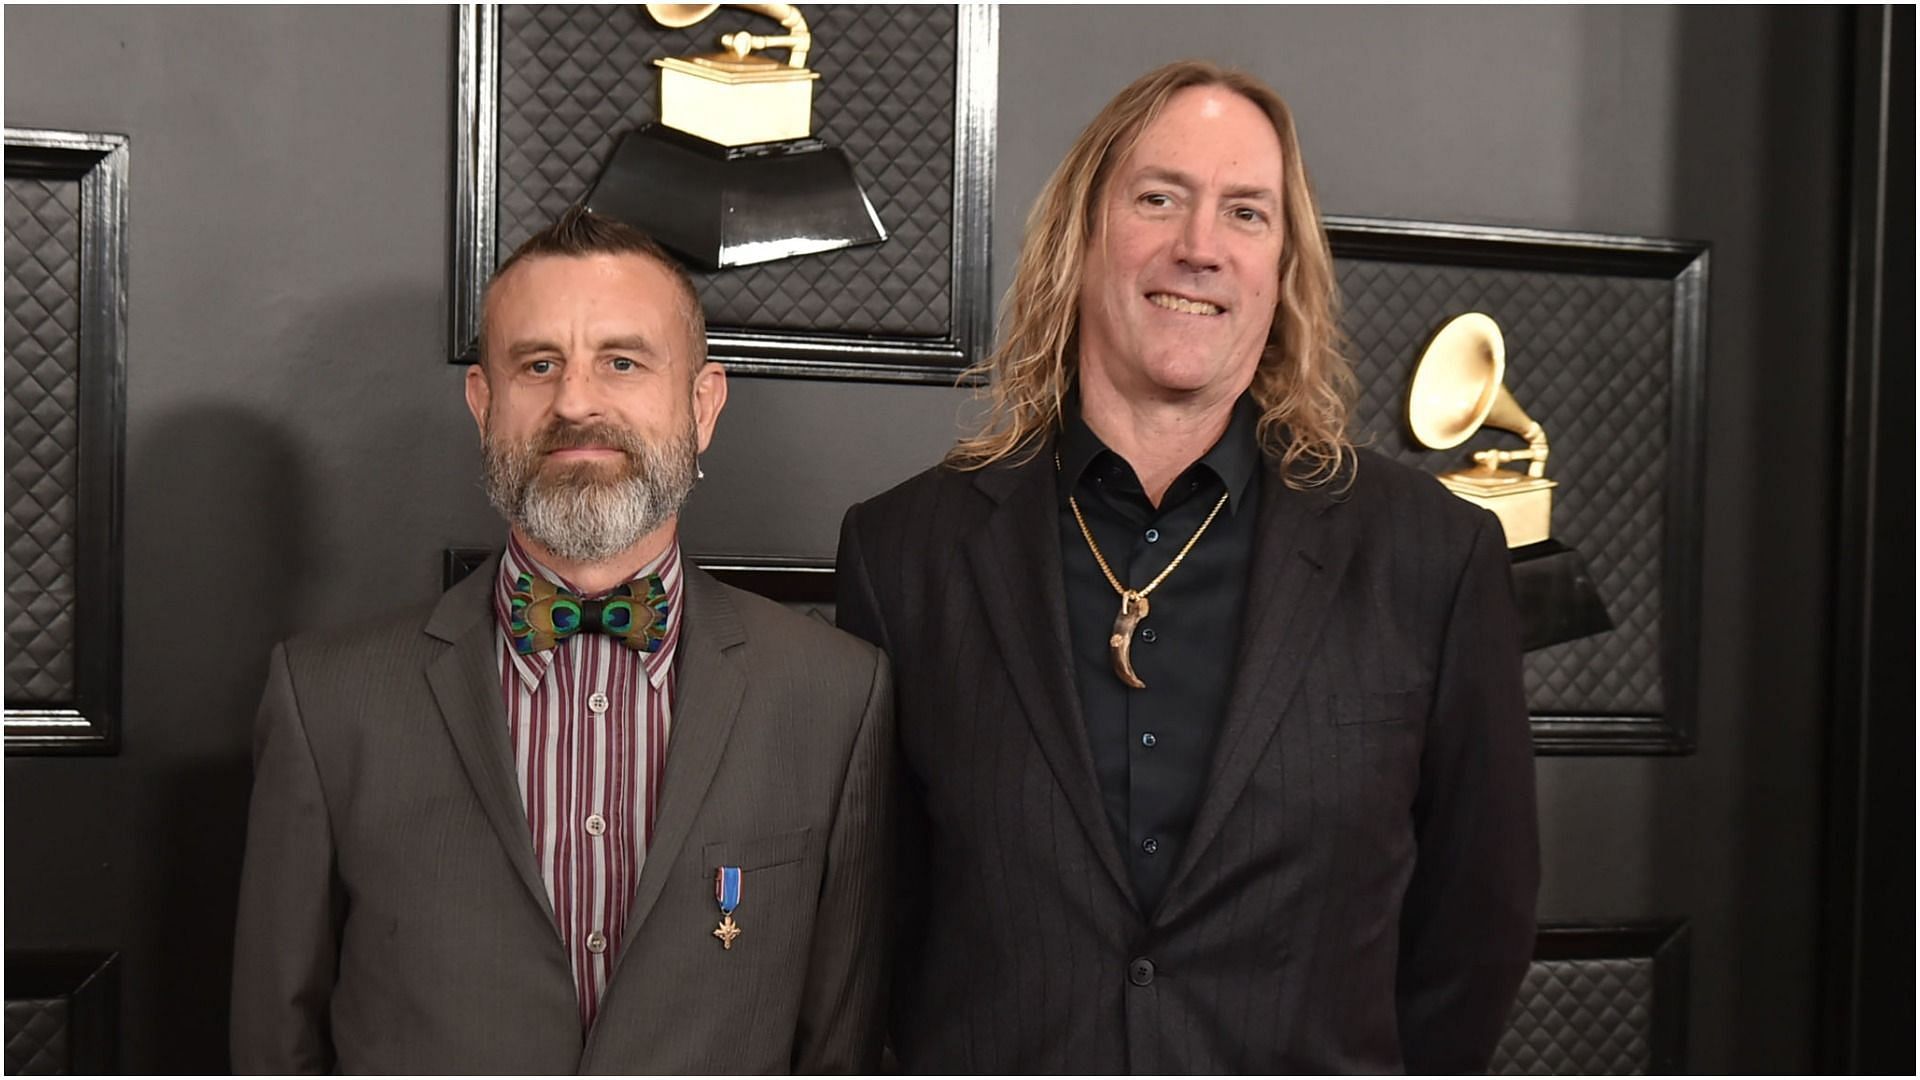 Justin Chancellor and Danny Carey of Tool attend the 62nd Annual Grammy Awards at Staples Center (Image by David Crotty via Getty Images)